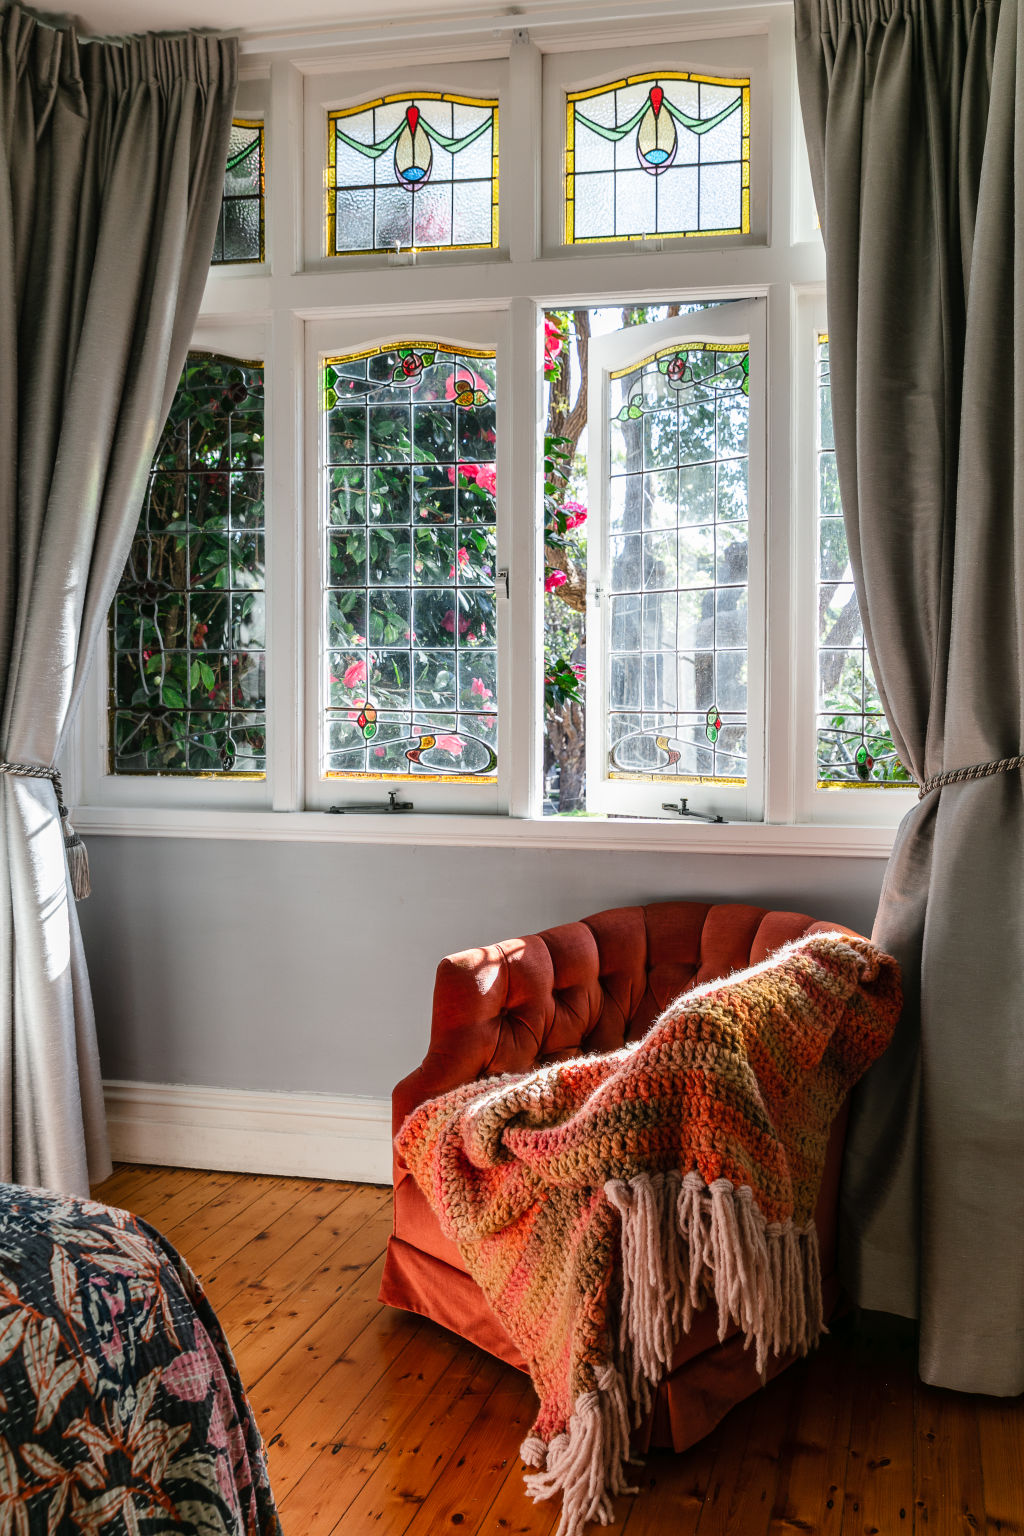 The couple preserved the integrity of the Victorian home and kept the stained glass windows in the front. Photo: Moss + Co Photography